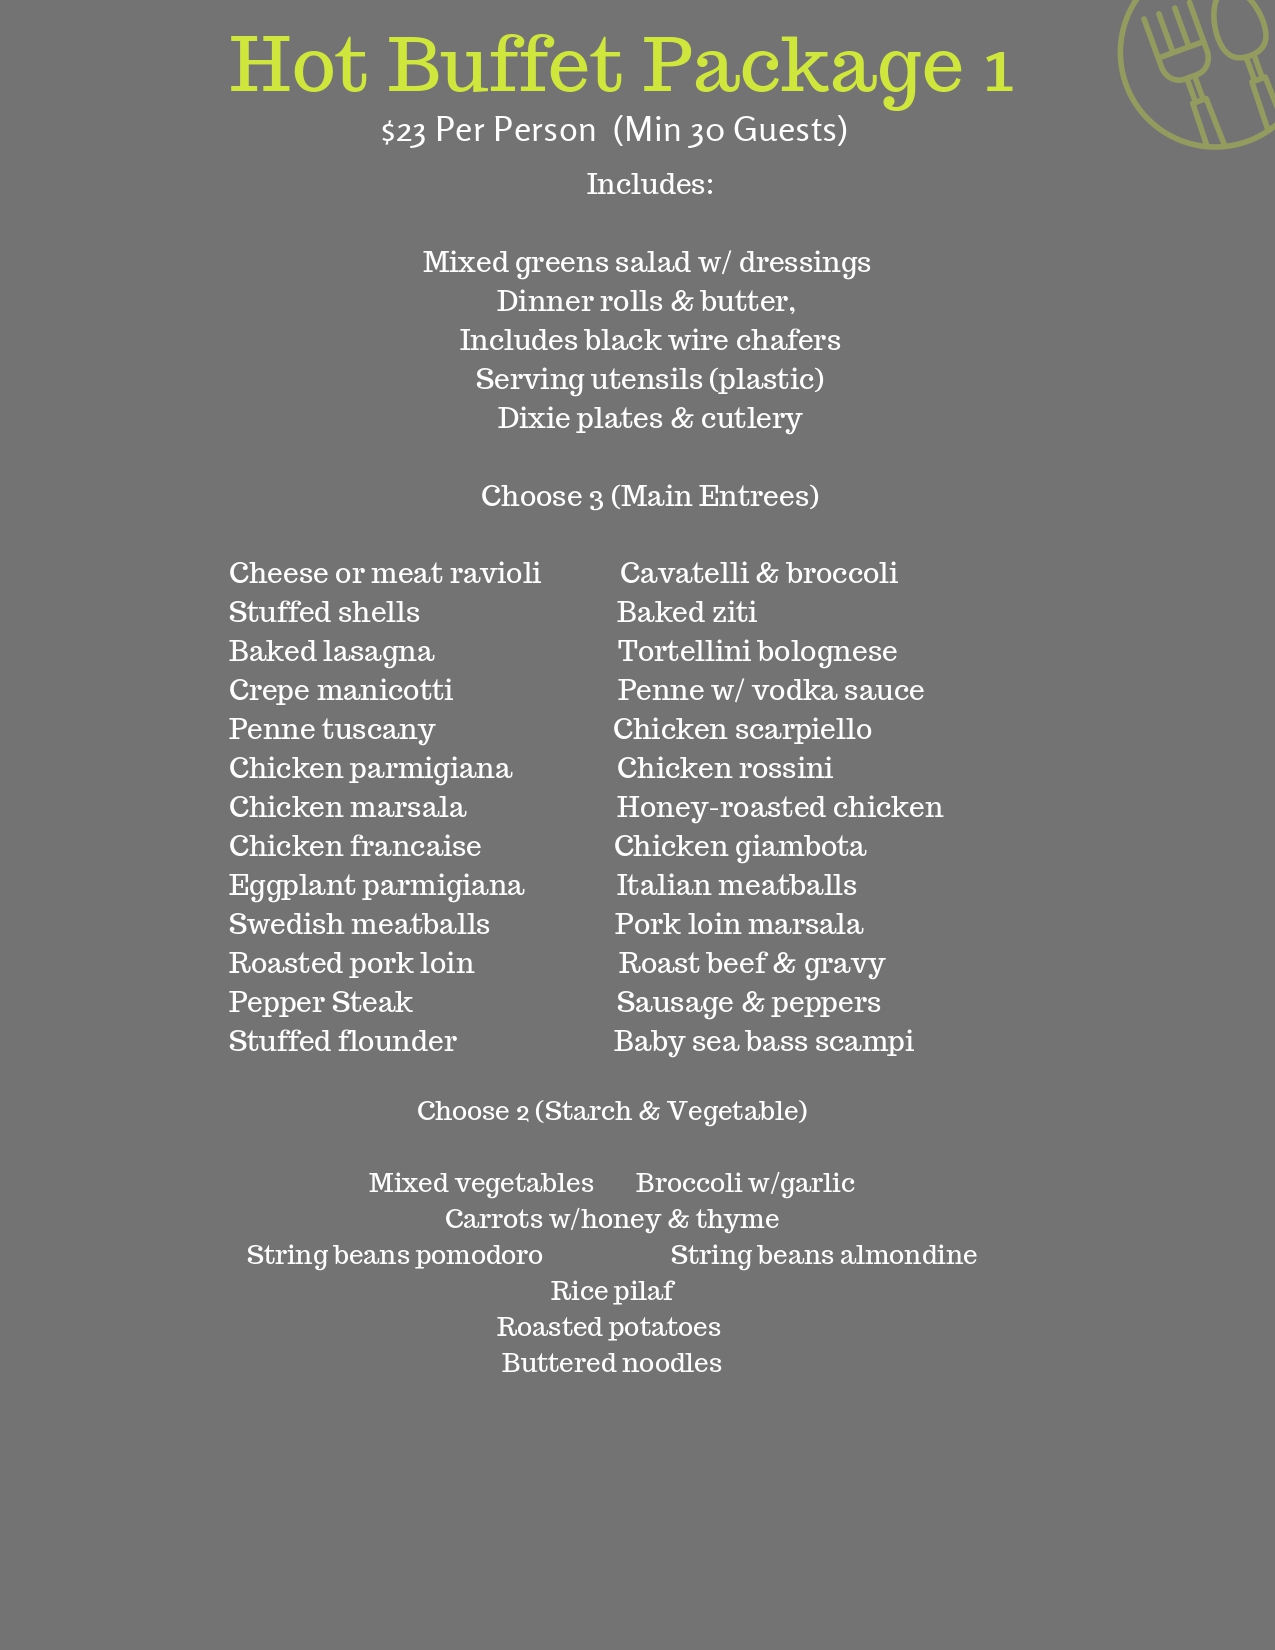 A menu of the restaurant at the bottom of the page.